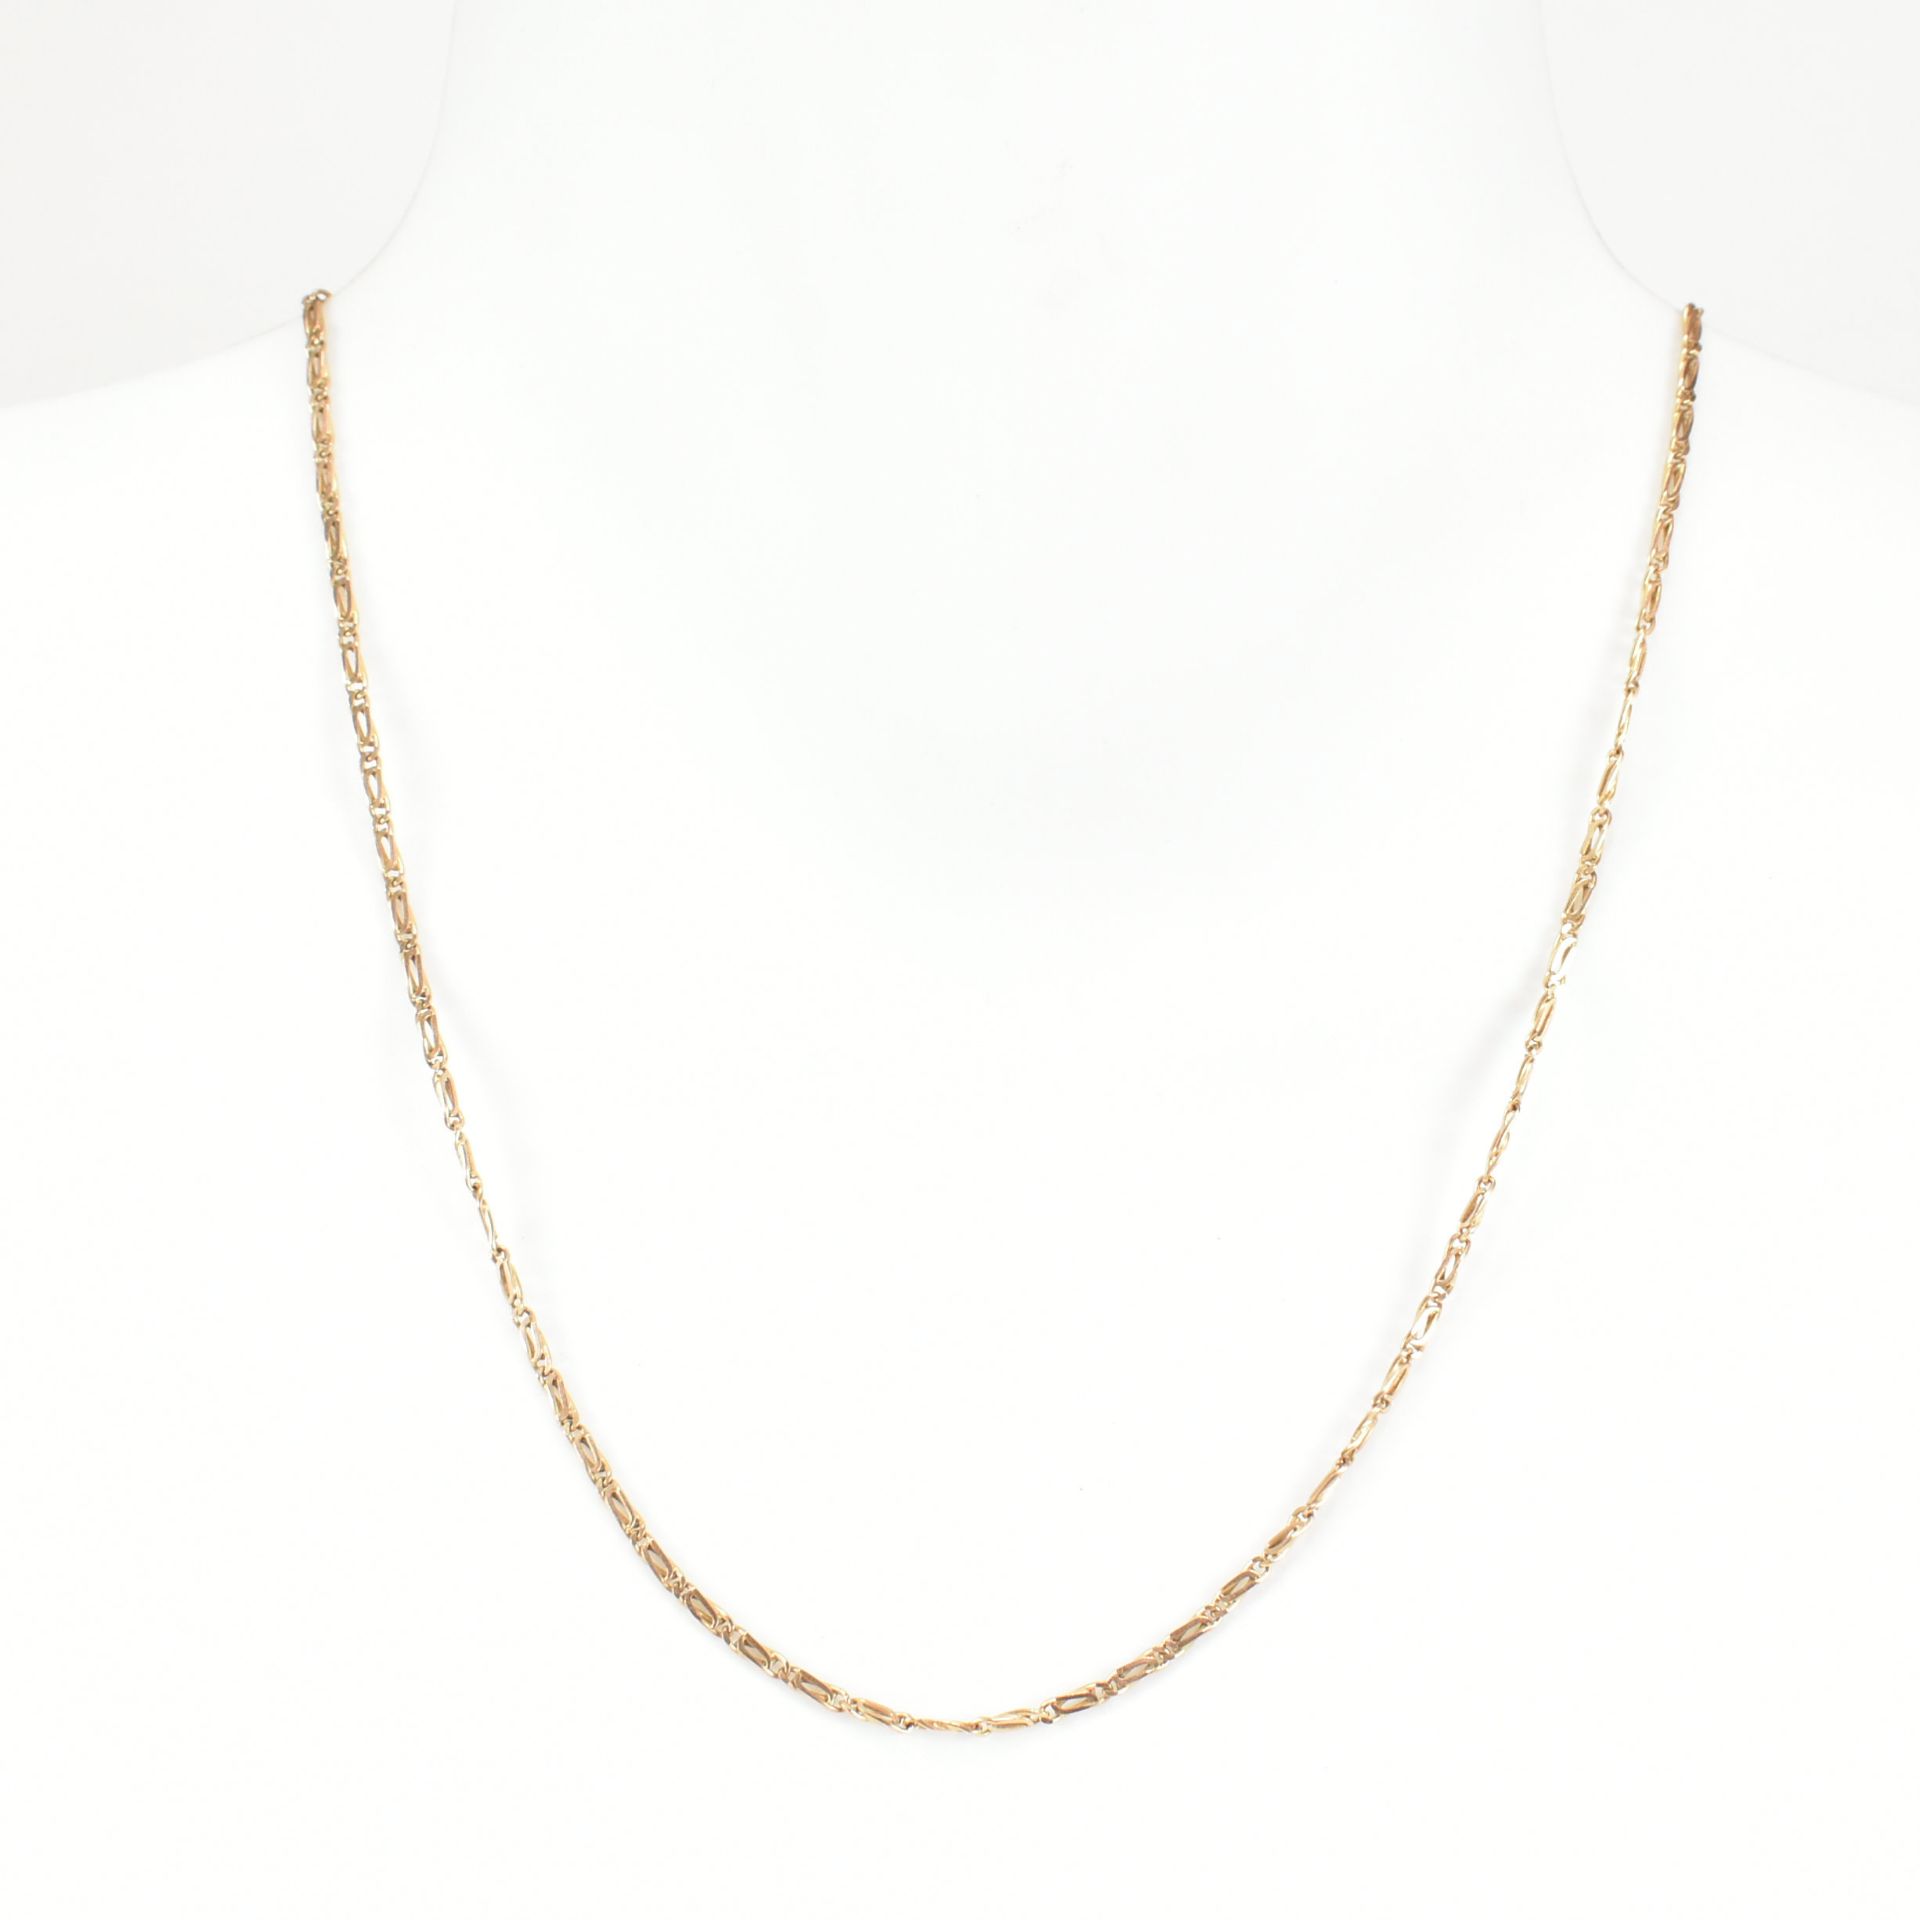 HALLMARKED 9CT GOLD FANCY LINK CHAIN NECKLACE - Image 2 of 4